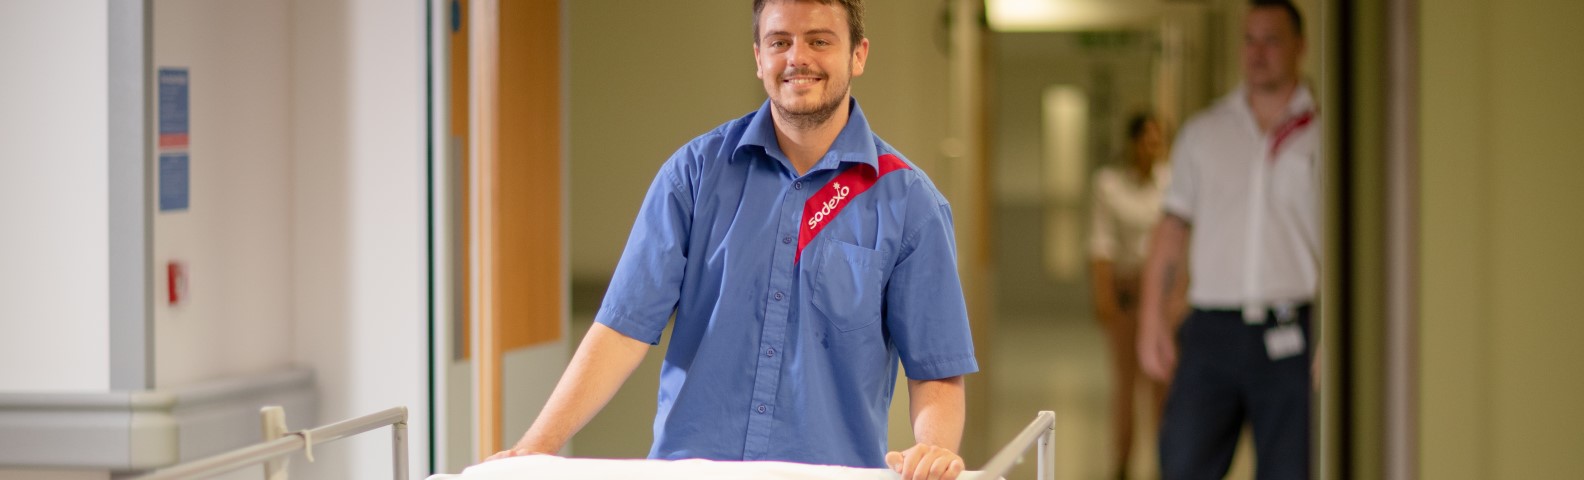 man pushing a stretcher in a hallway and smiling